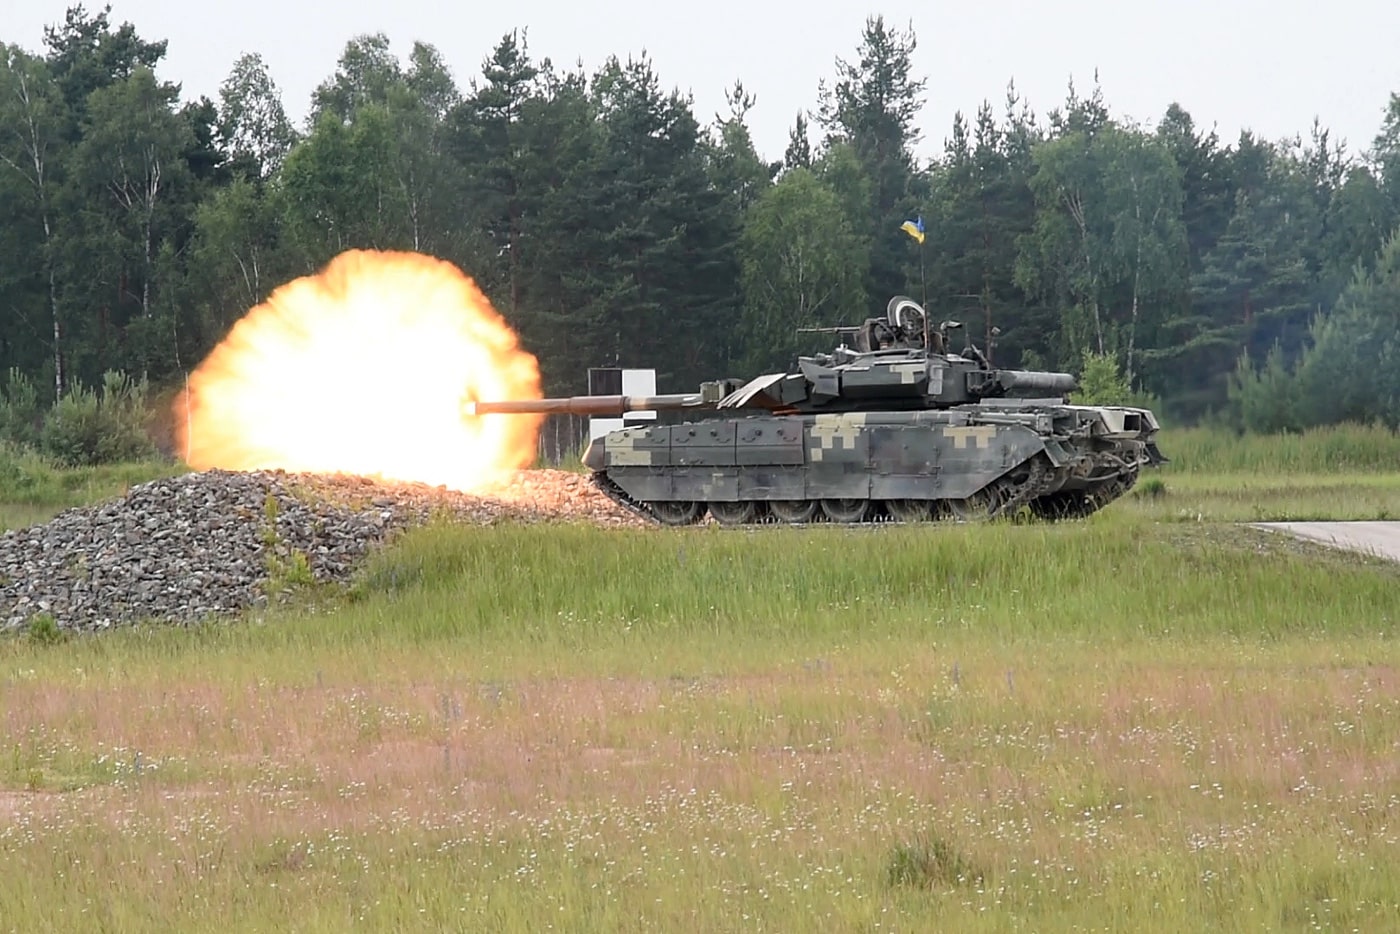 In this photograph we see the massive fireball around the muzzle of the main gun as a T-84 tank fires it  during training.